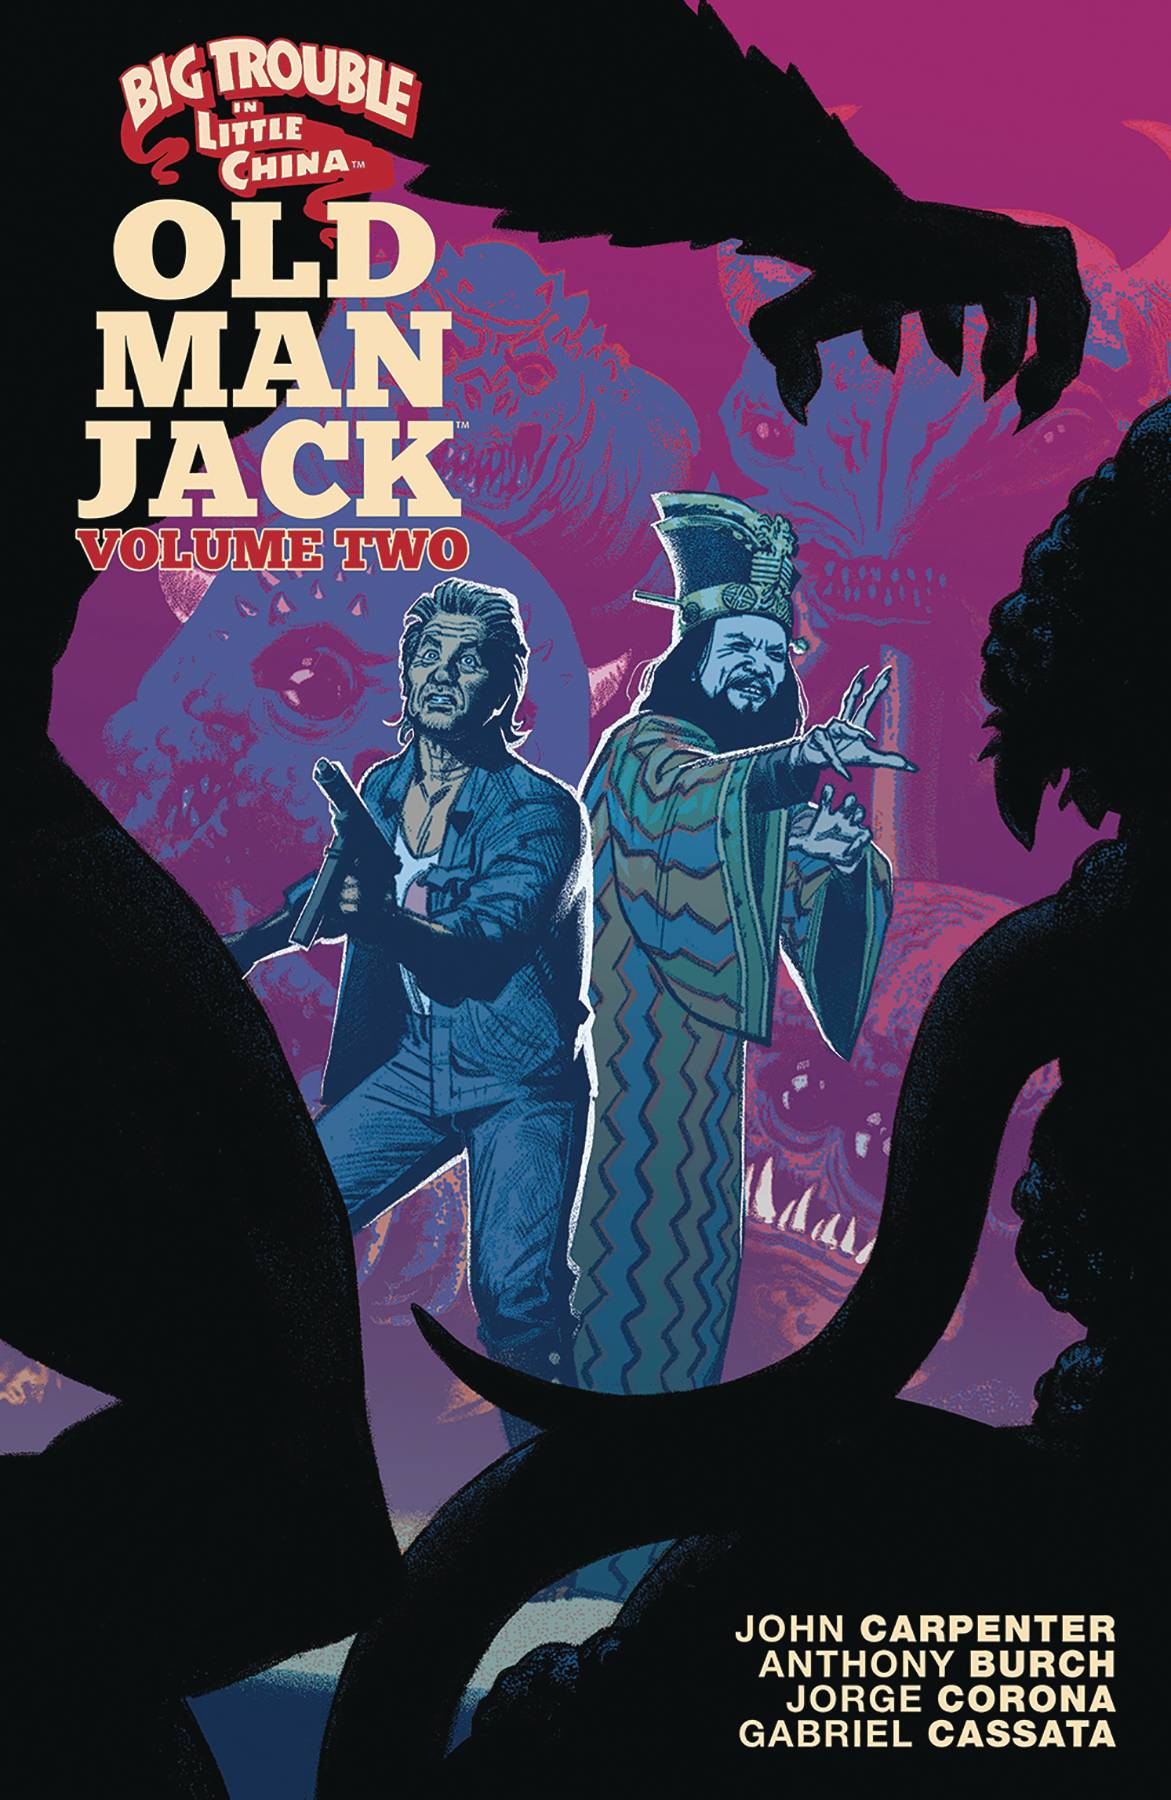 Big Trouble in Little China Old Man Jack Graphic Novel Volume 2